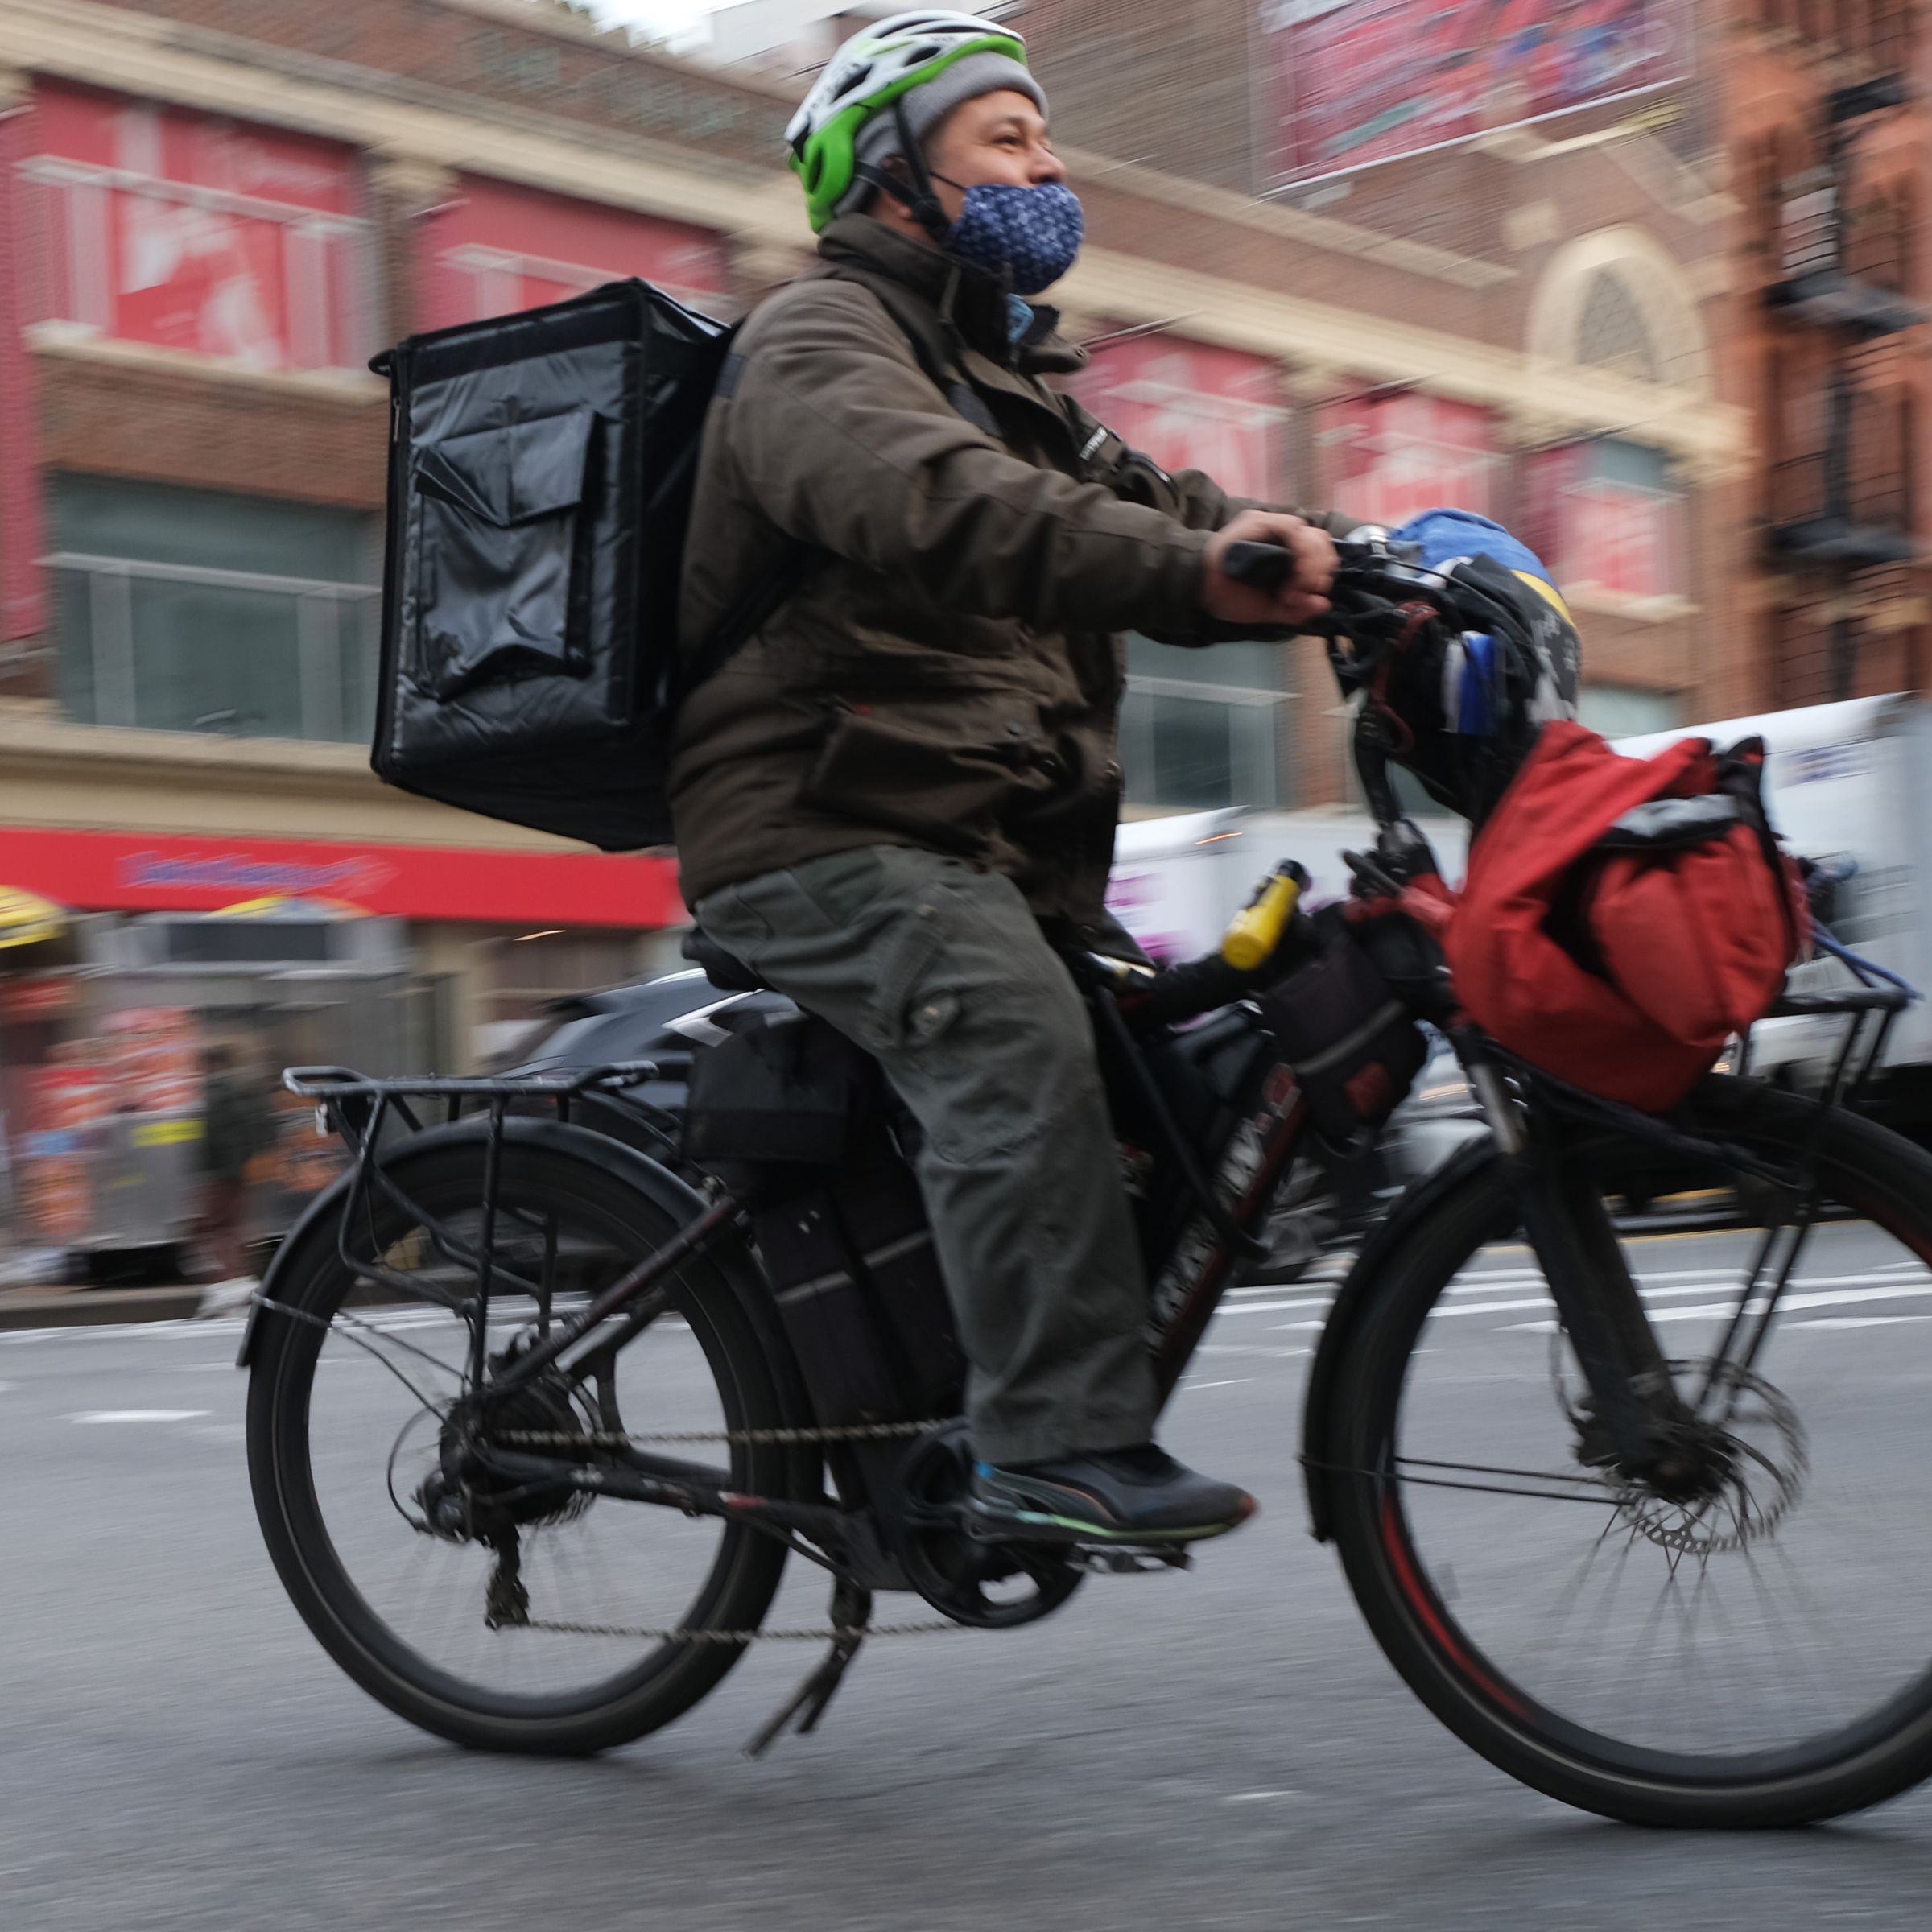 A delivery worker with a package on their back rides an e-bike in Manhattan in New York City.